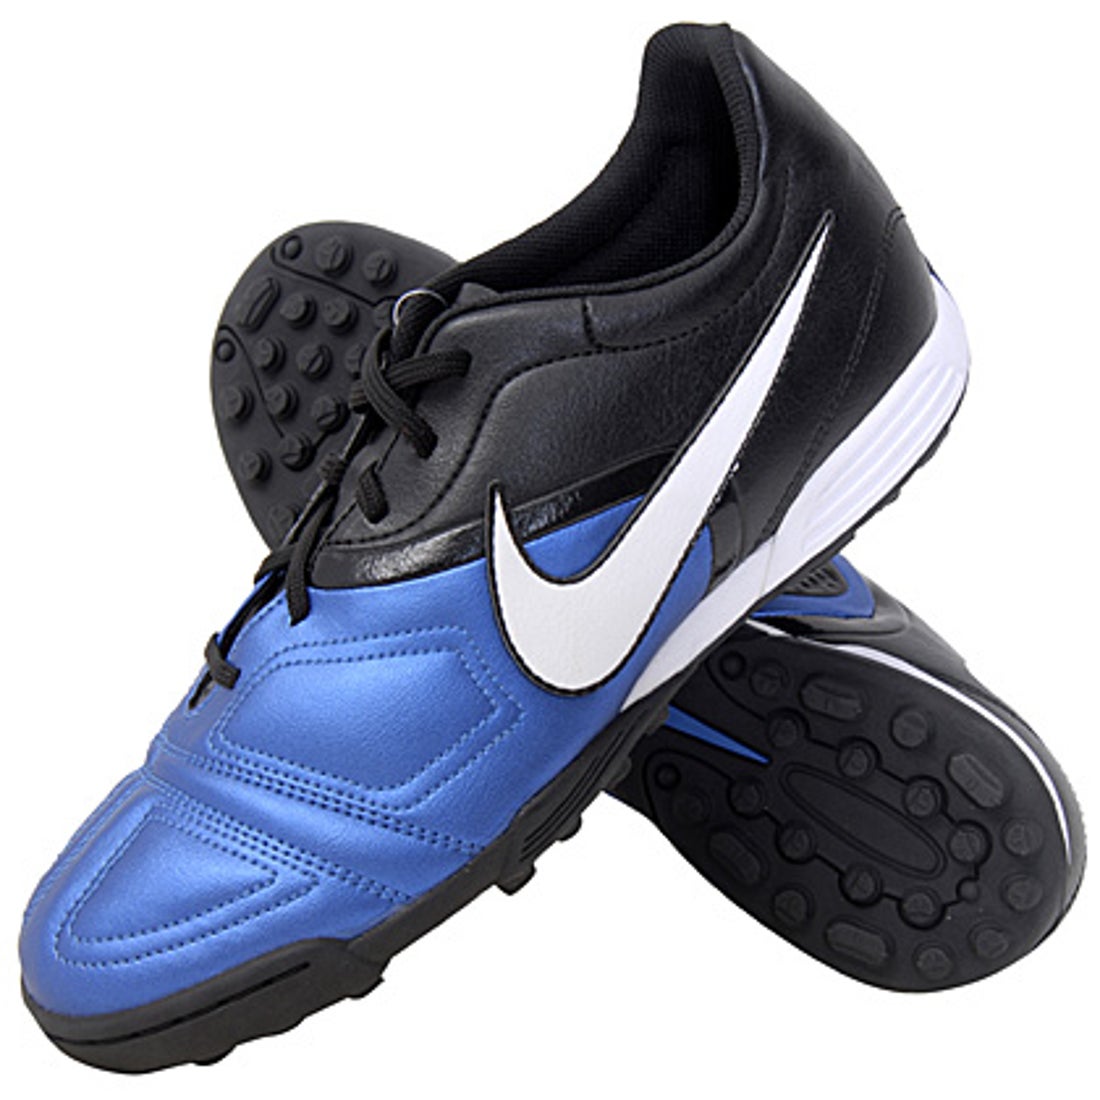 NIKE CTR360 ENGANCHE エンガンチェ III TF 26.5